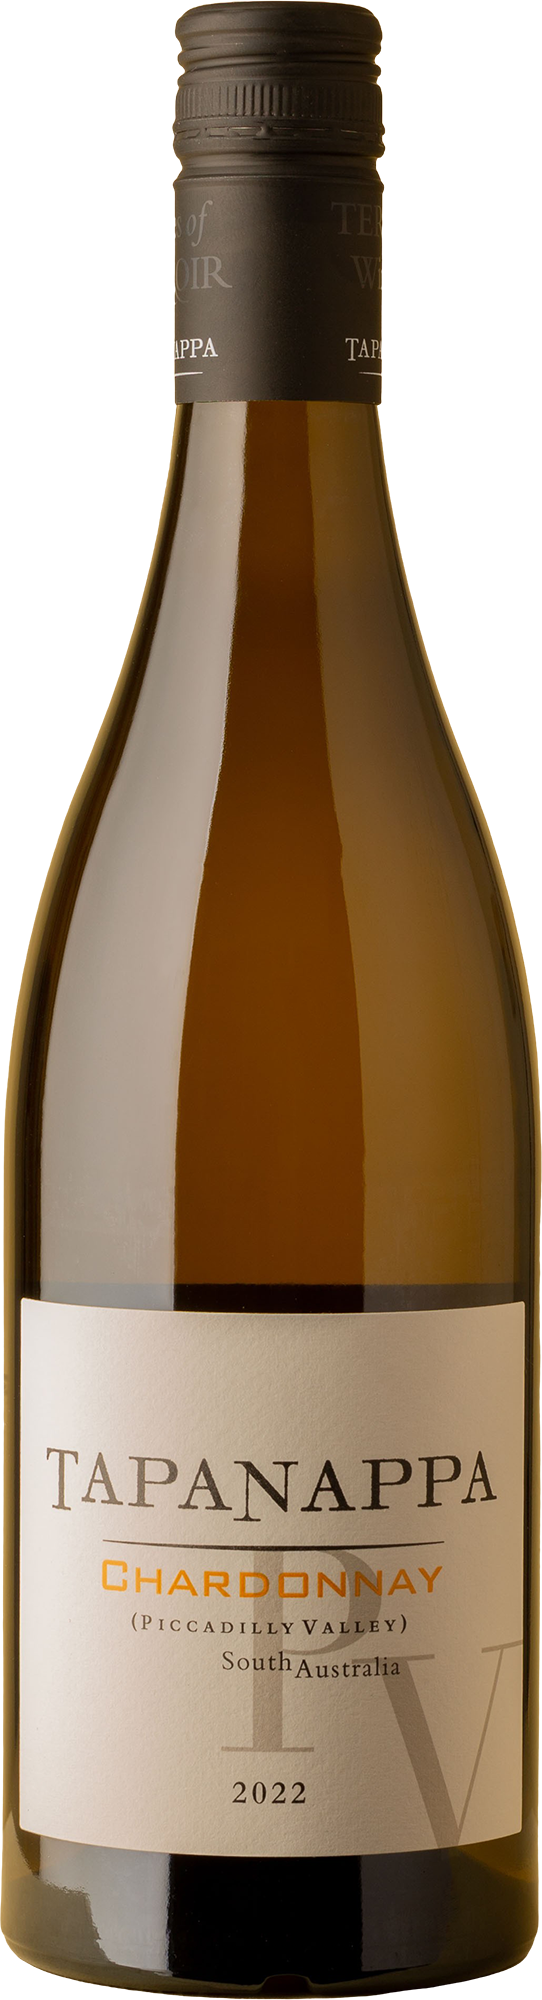 Tapanappa - Piccadilly Valley Chardonnay 2022 White Wine